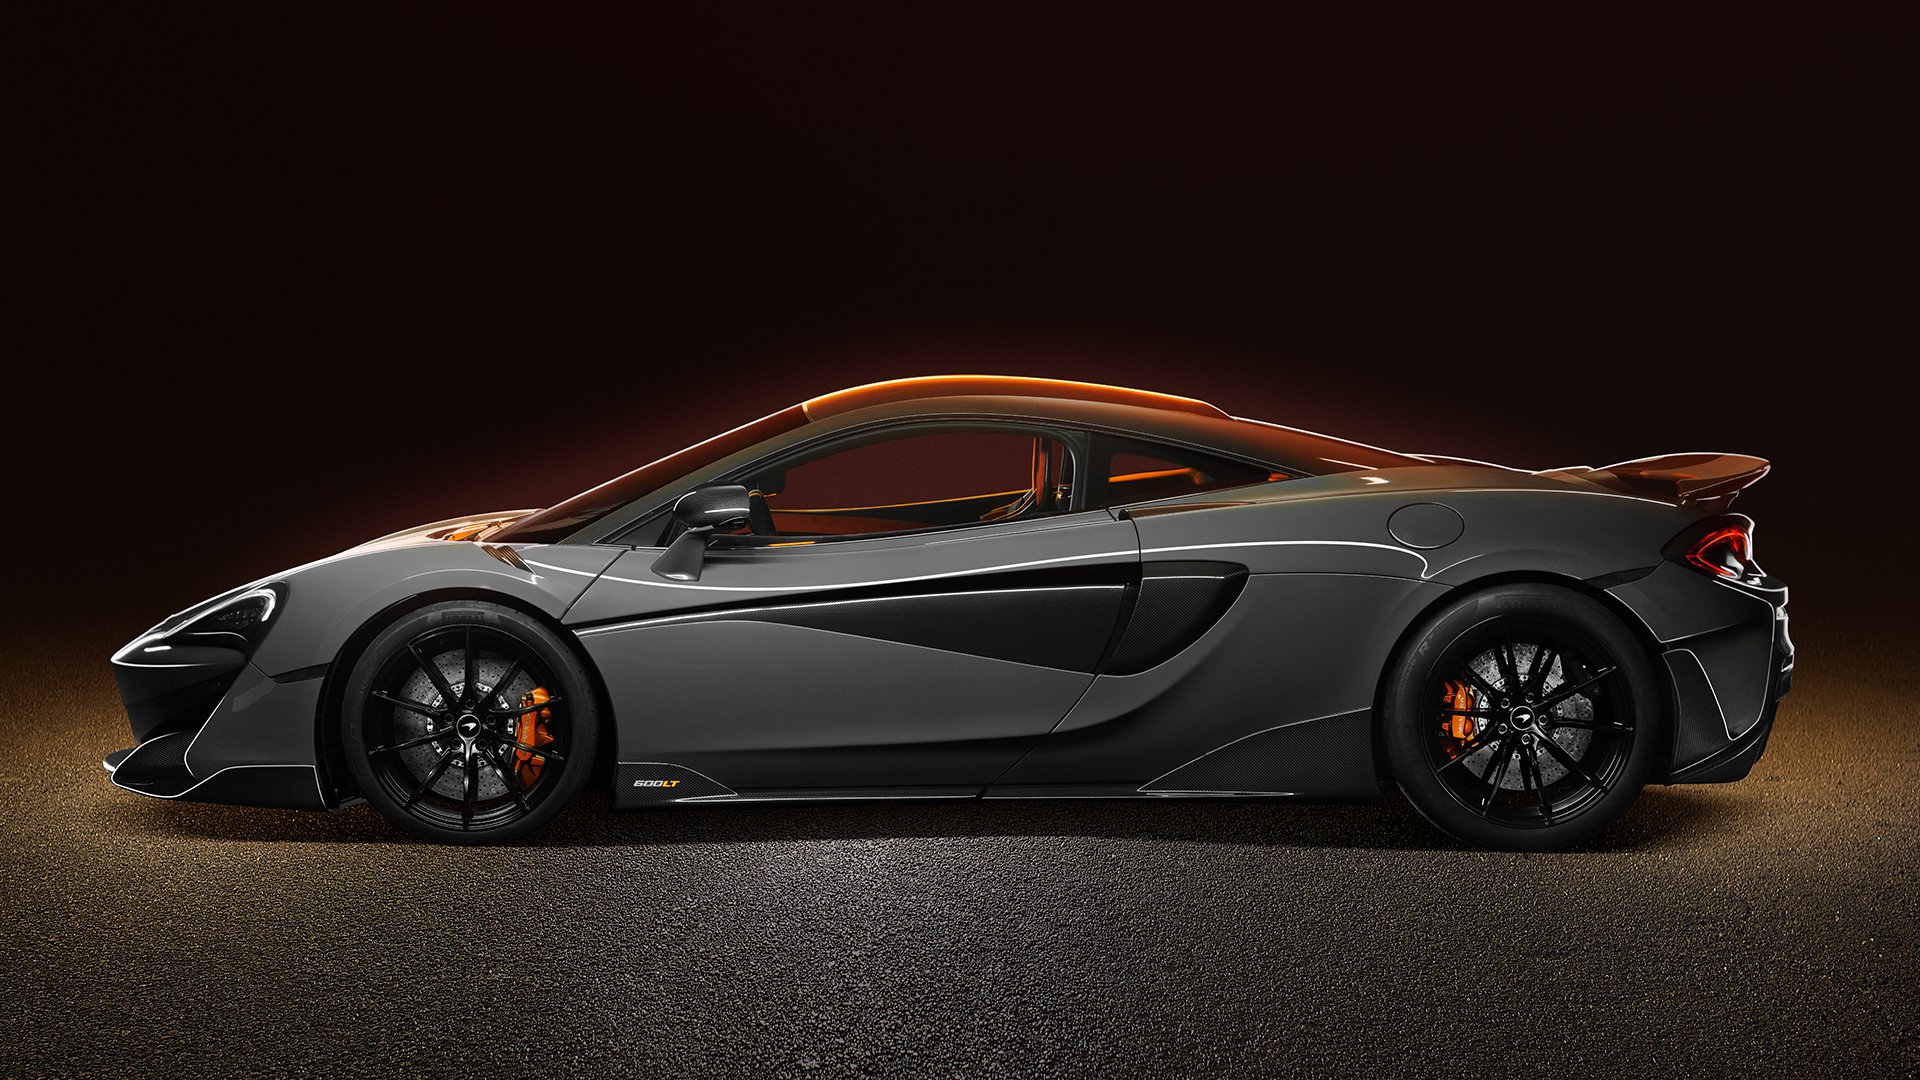 Supercars.Net's Comprehensive Guide To The 2019 McLaren 600LT